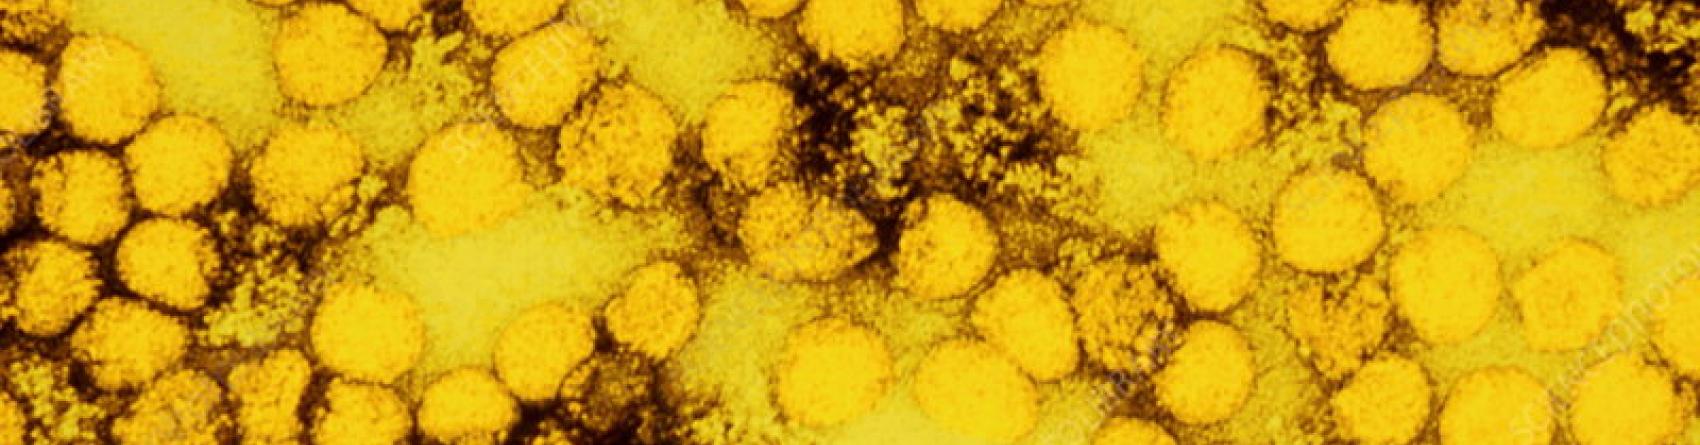 Yellow fever virus by CDC